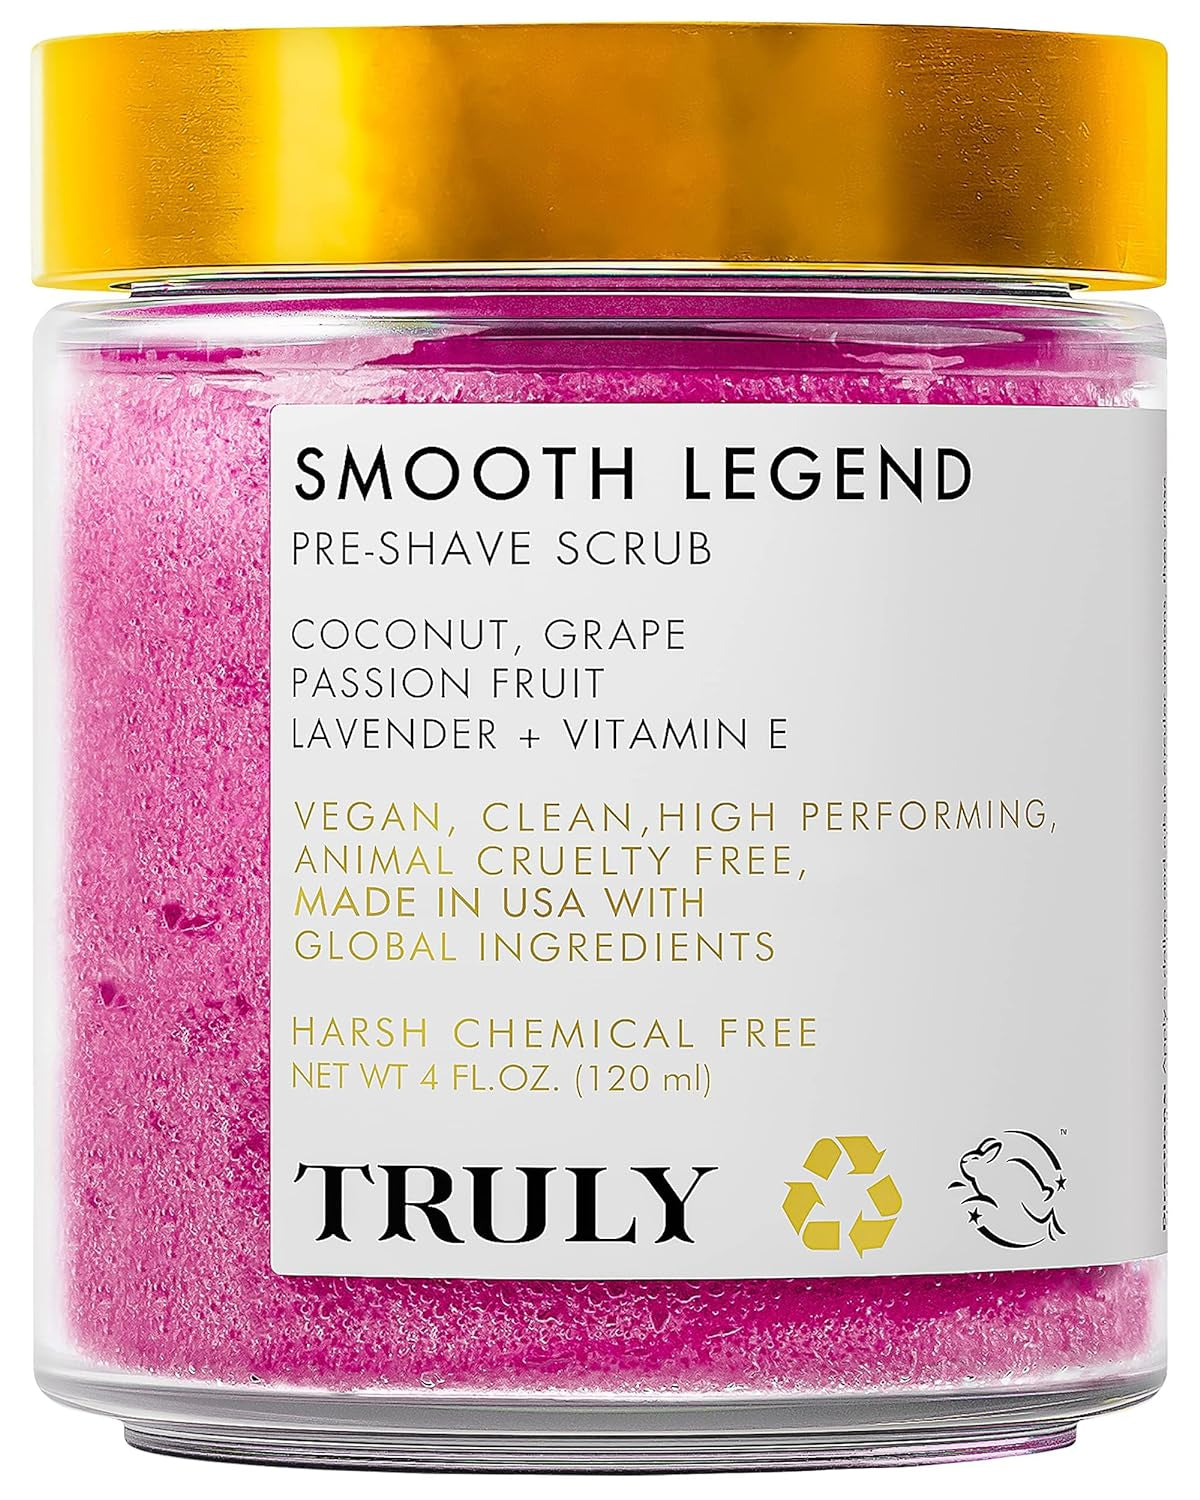 Professional Product Title: "Truly Beauty KP Treatment Moon Rocks Sugar Scrub - Nourishing and Luxurious Body Exfoliation for Women - Natural Body Scrub Infused with Vitamin E and Essential Antioxidants"